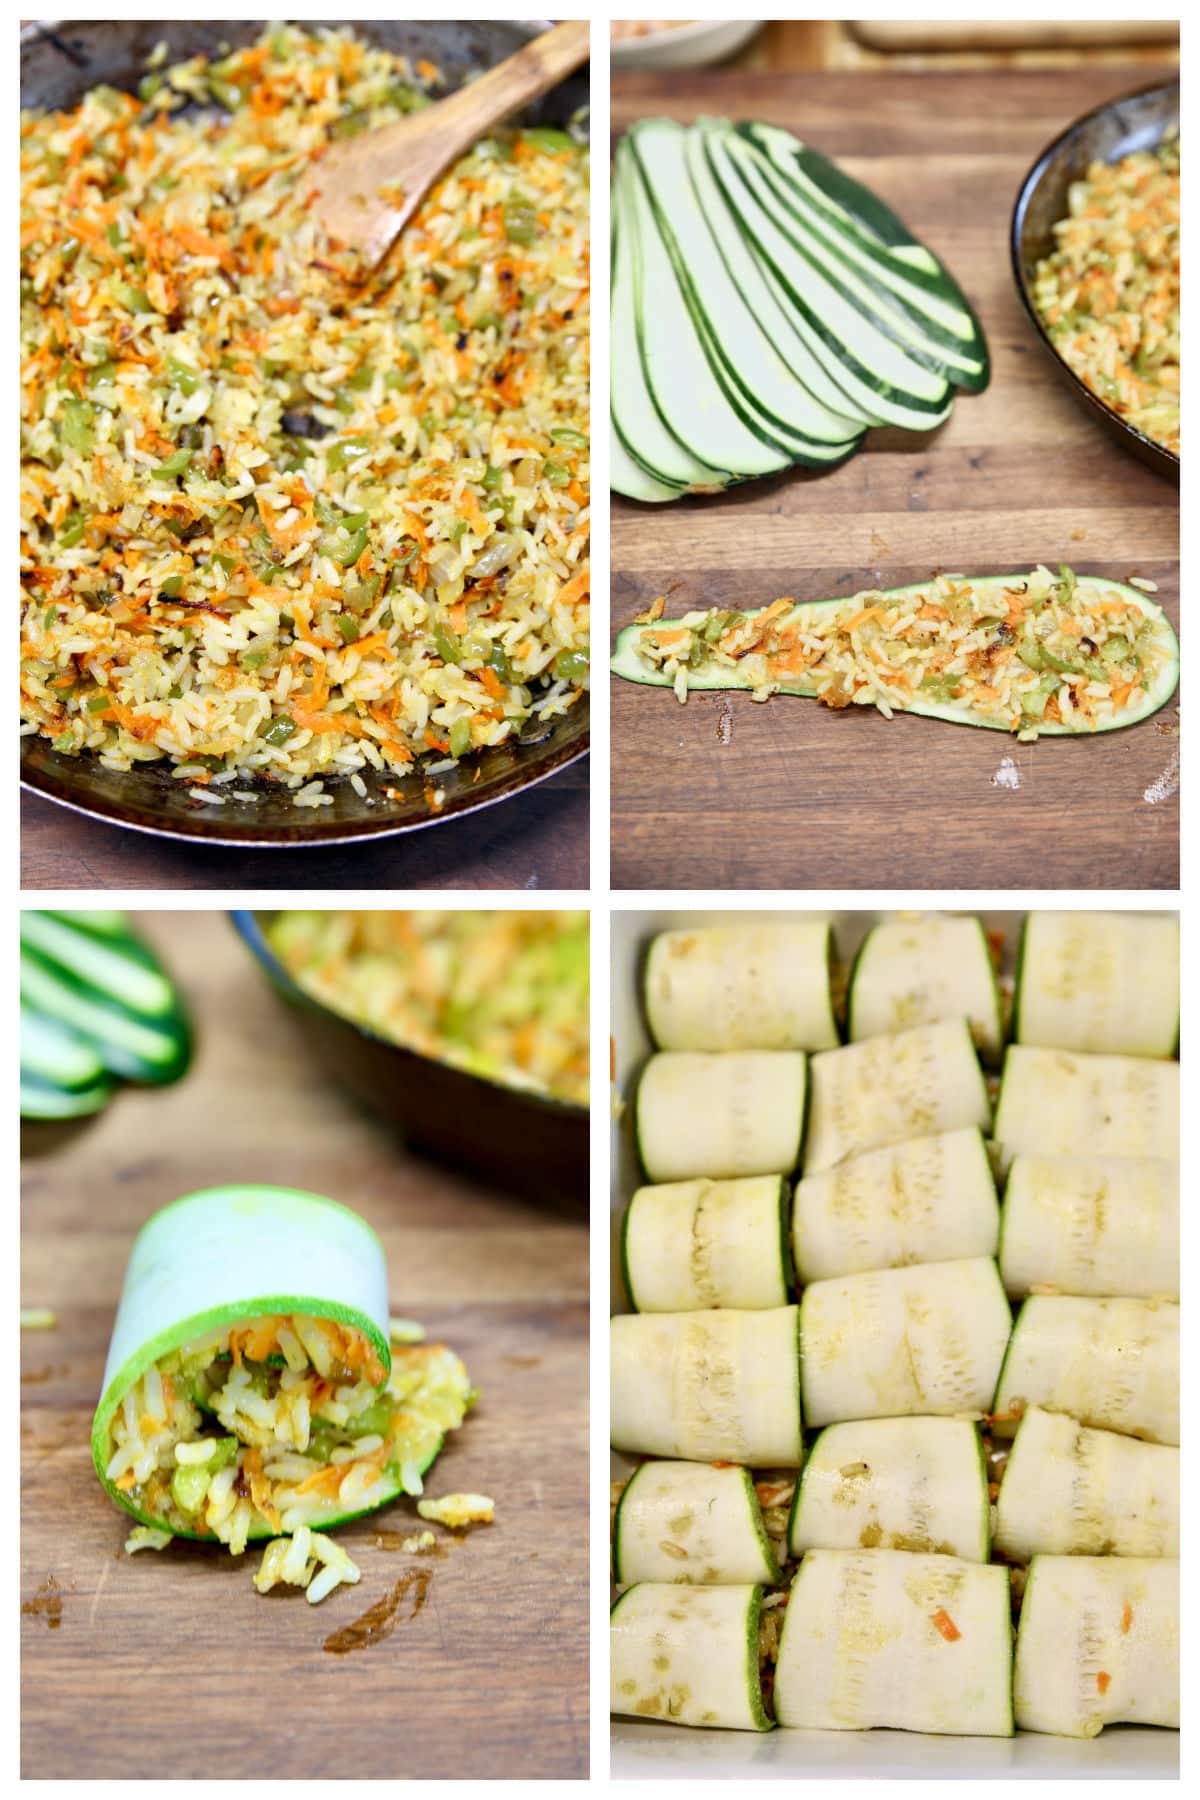 Collage: making zucchini casserole with rice filling.